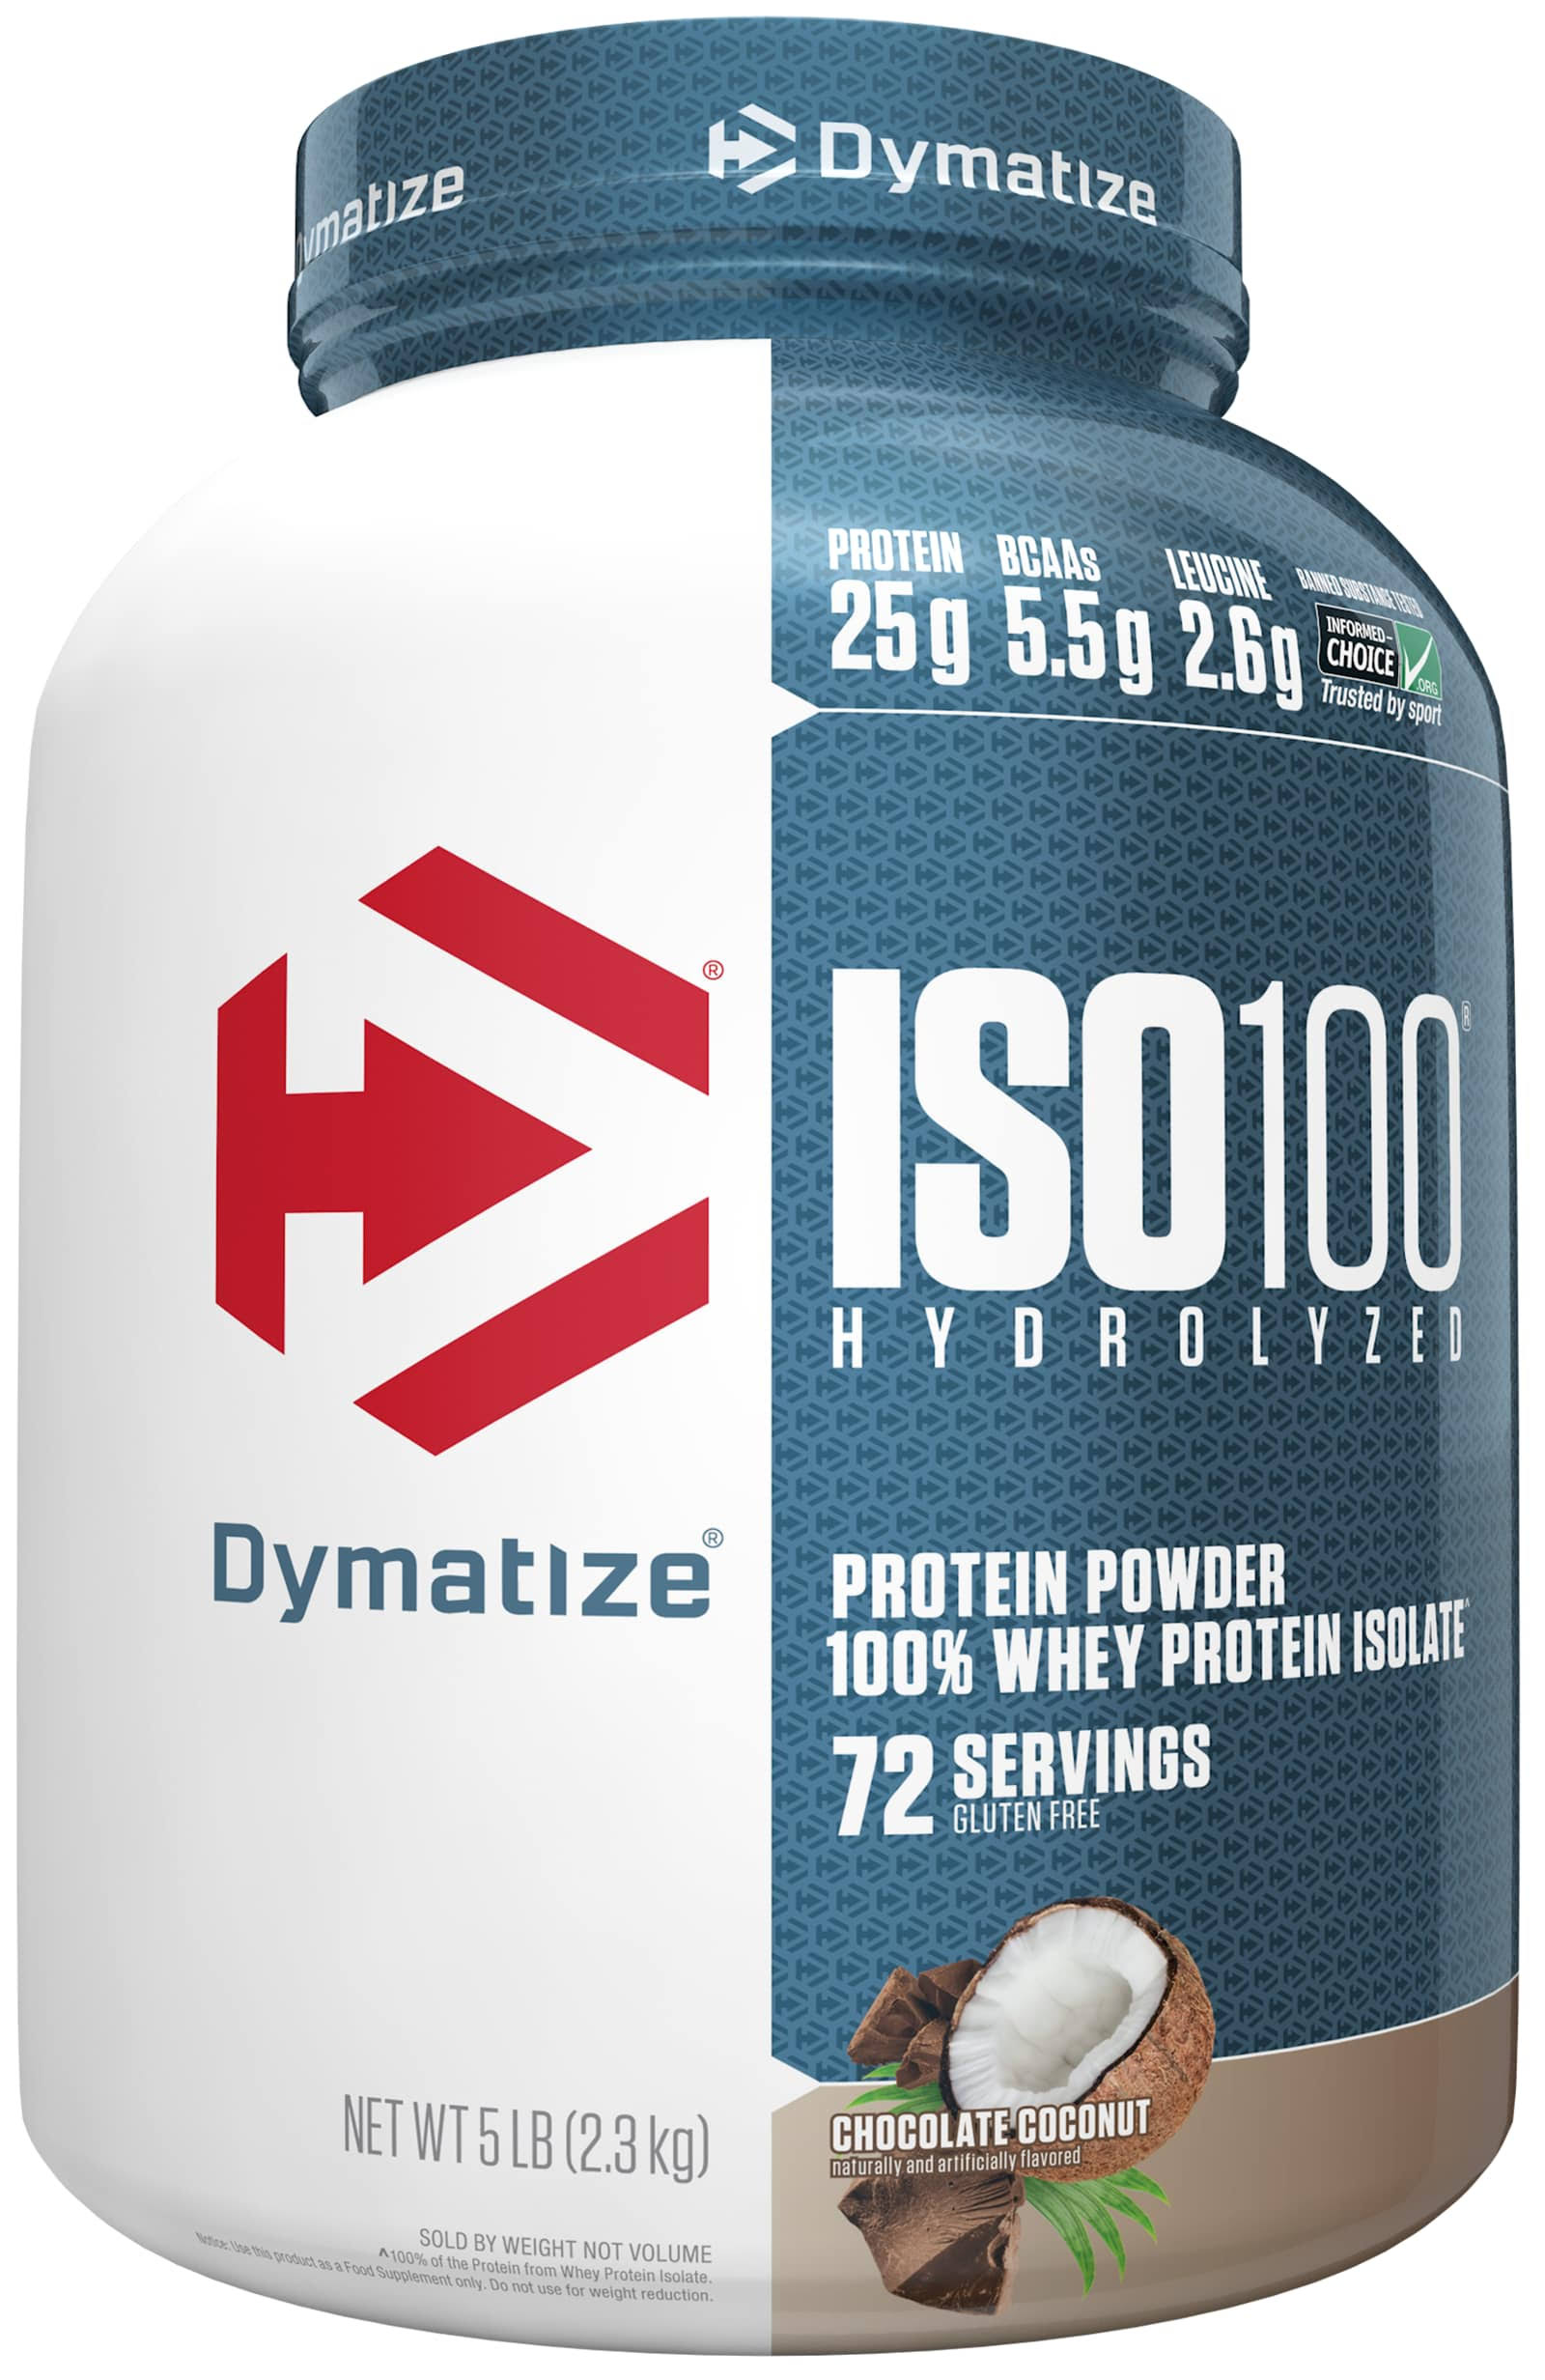 Dymatize ISO 100 Protein Powder Supplement - Chocolate Coconut, 5lbs